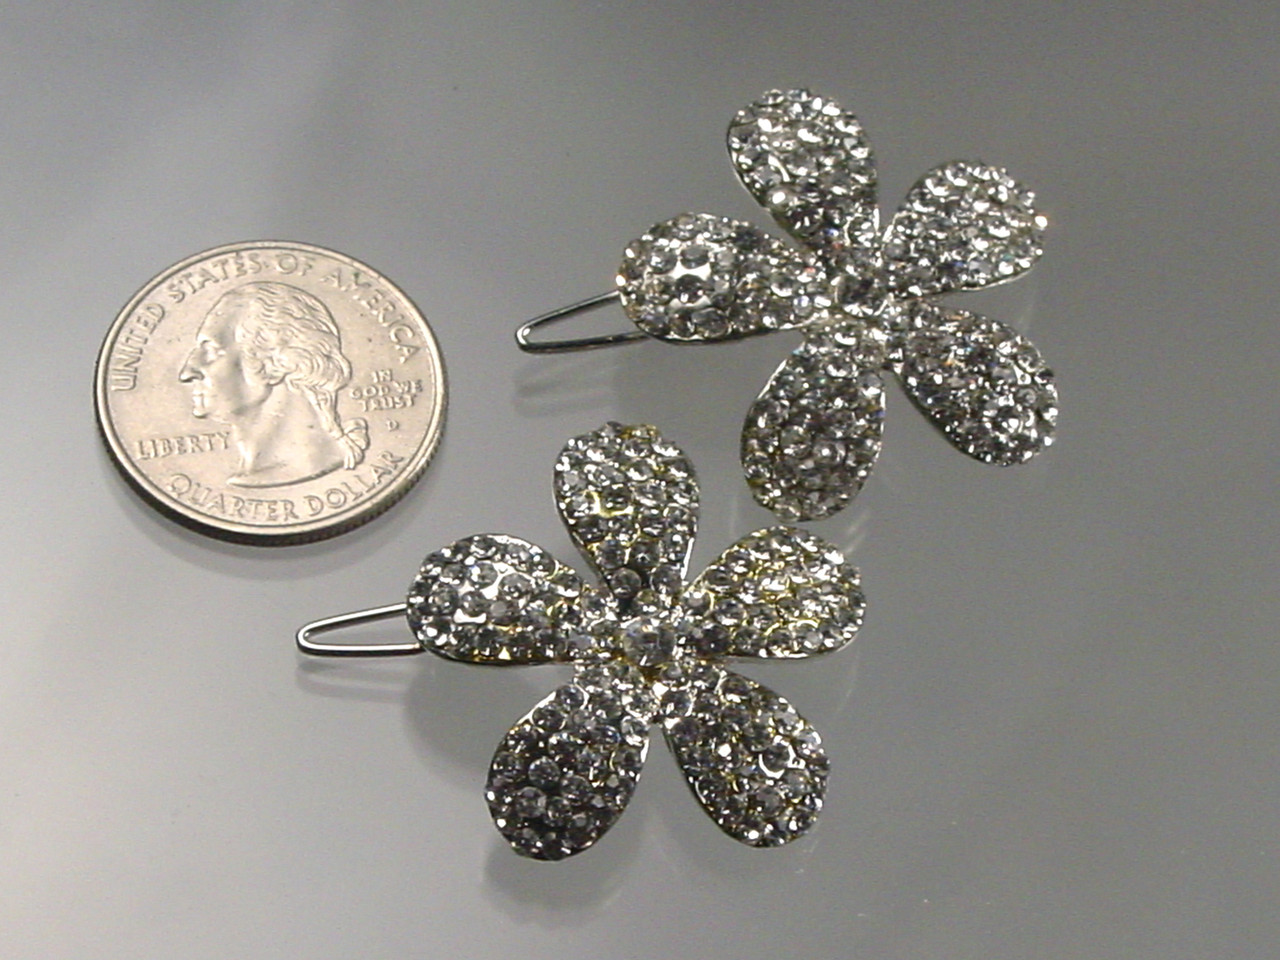 Size Comparison of Hair Jewelry